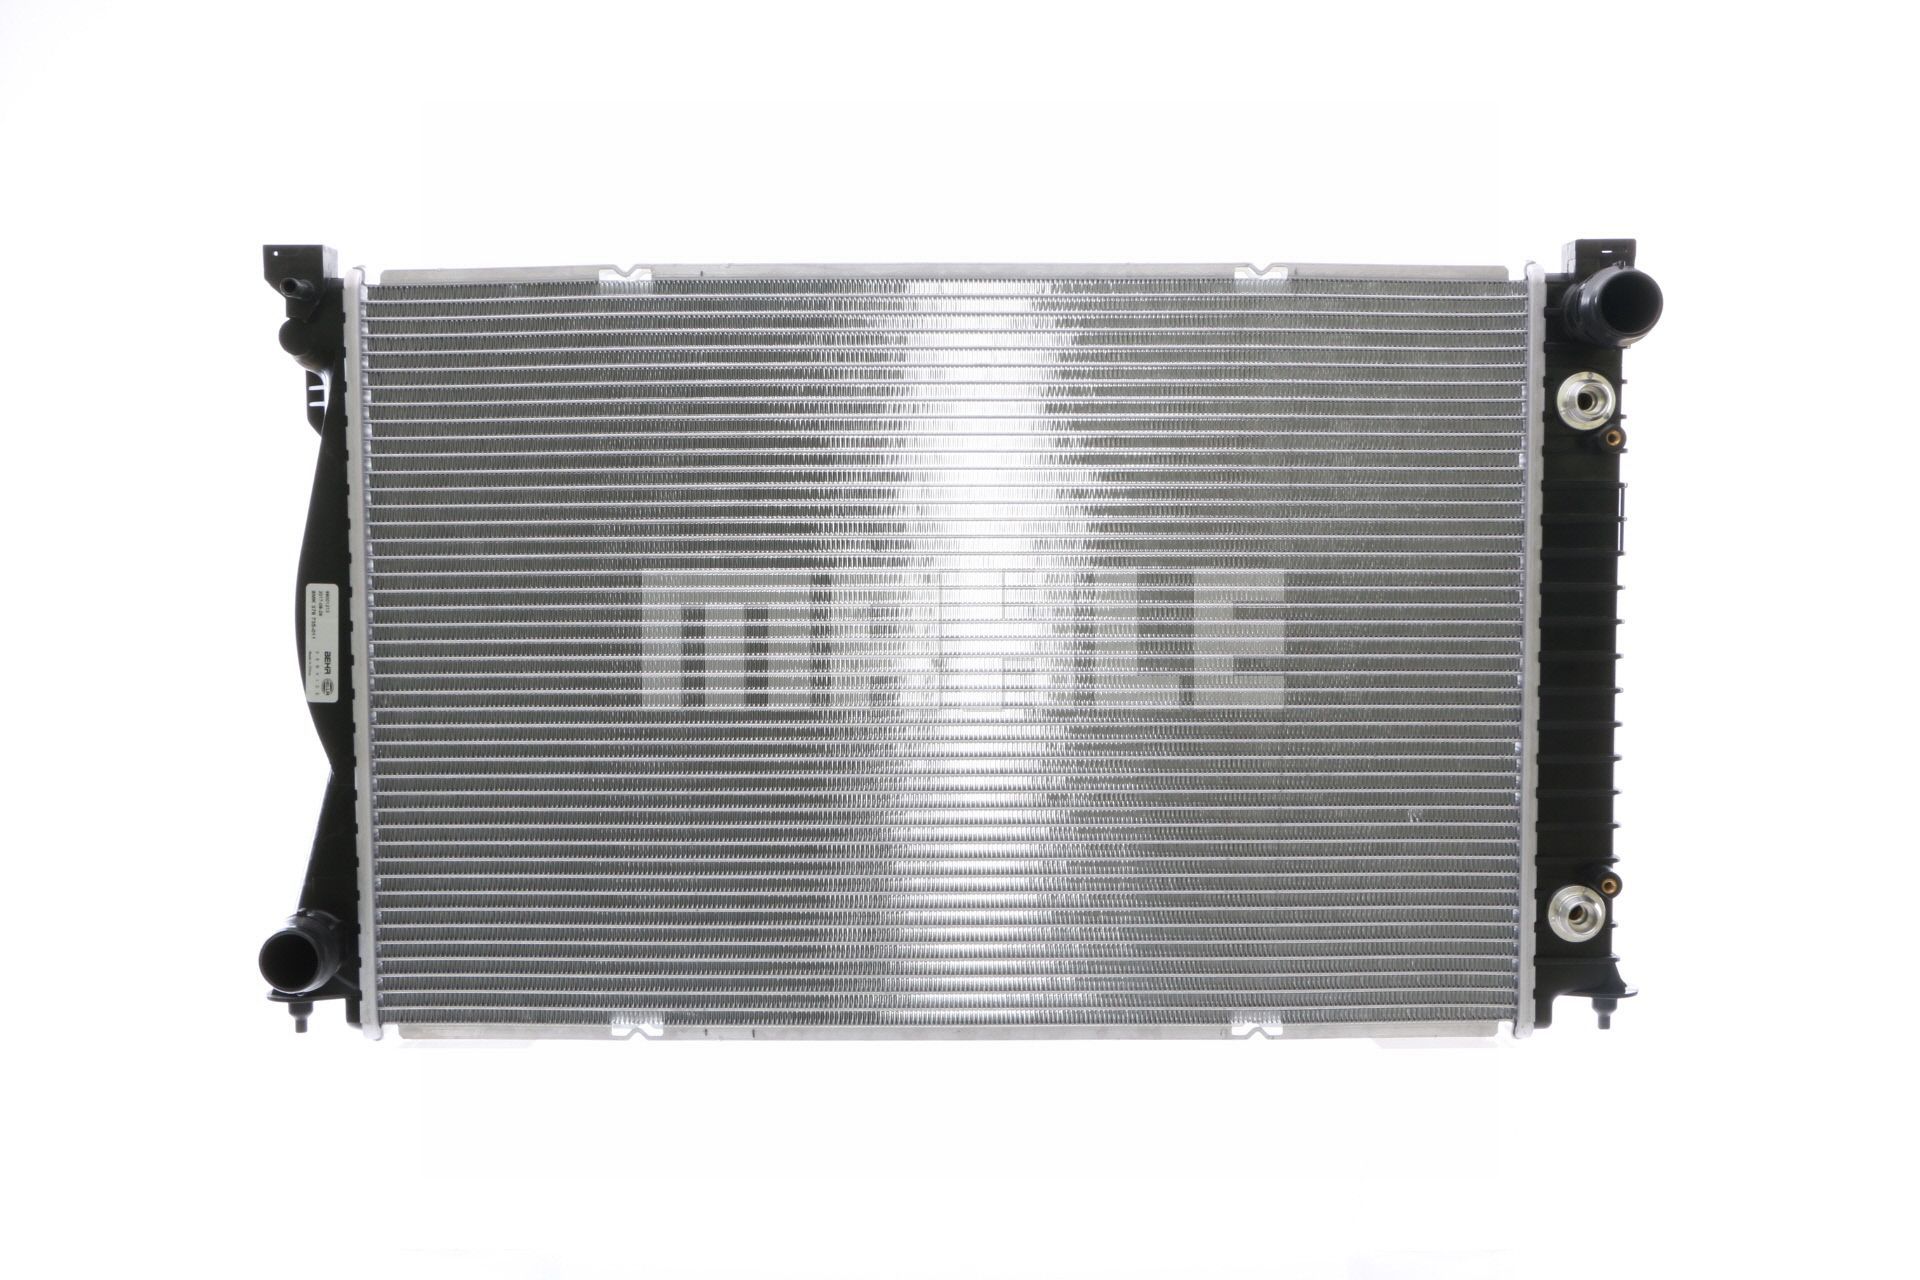 MAHLE ORIGINAL CR 830 000S Engine radiator for vehicles with air conditioning, 678 x 438 x 32 mm, Automatic Transmission, Brazed cooling fins